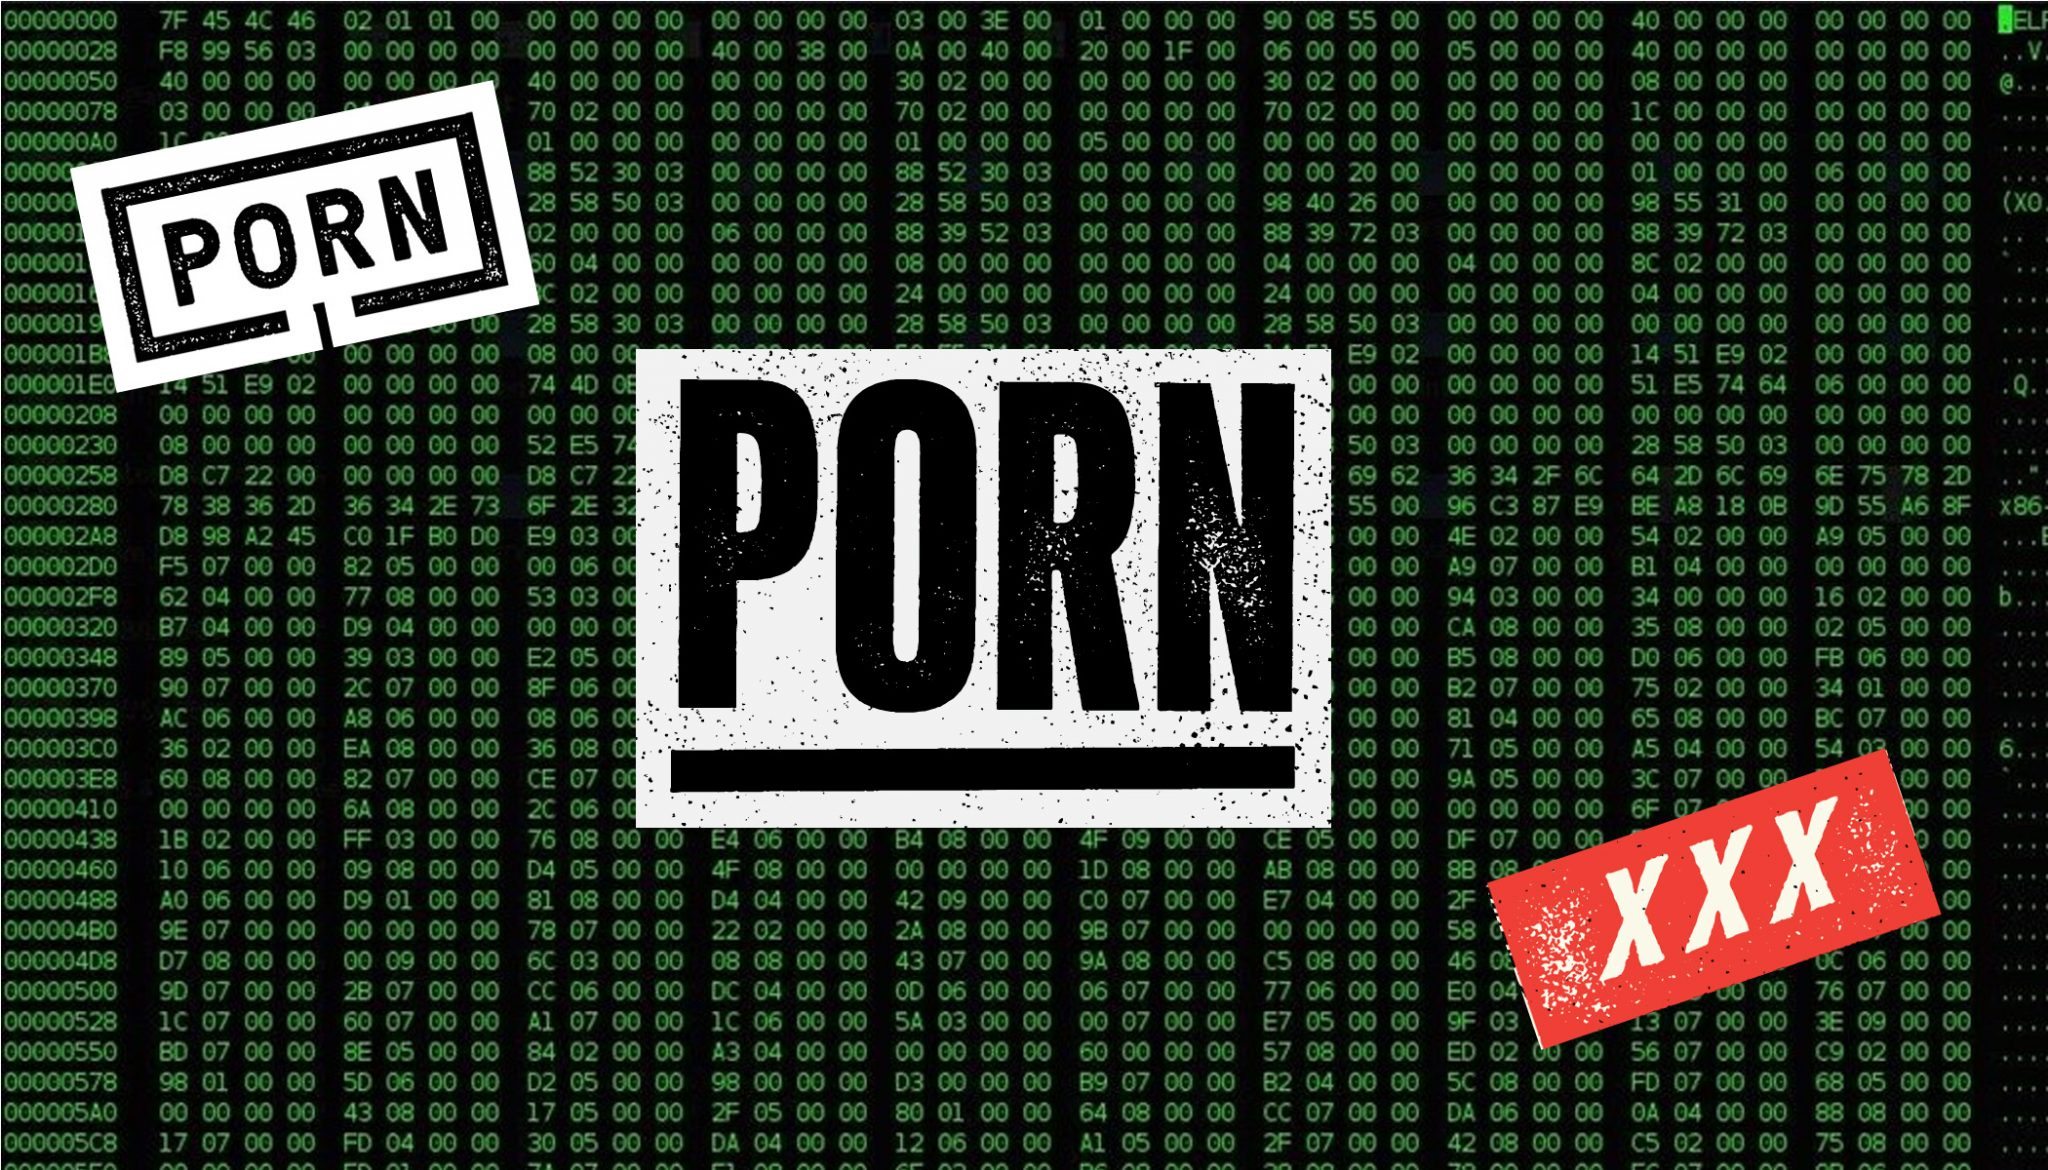 Hacked Porn - Porn Site Hacked: 800,000 User Names And Emails Released